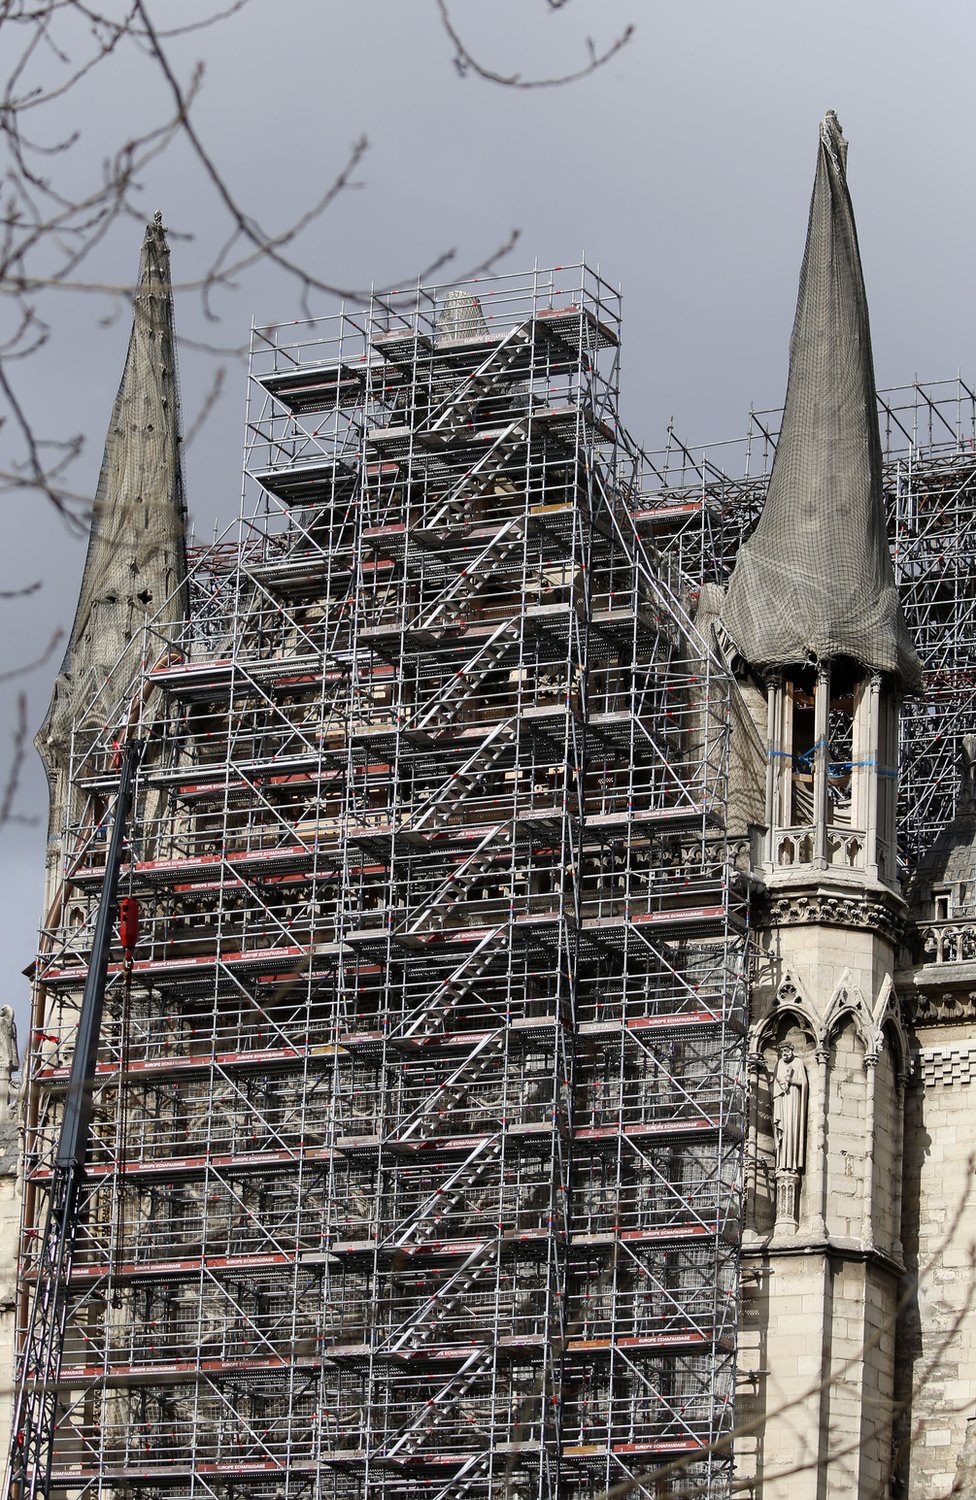 Scaffolding seen on the Notre-Dame cathedral